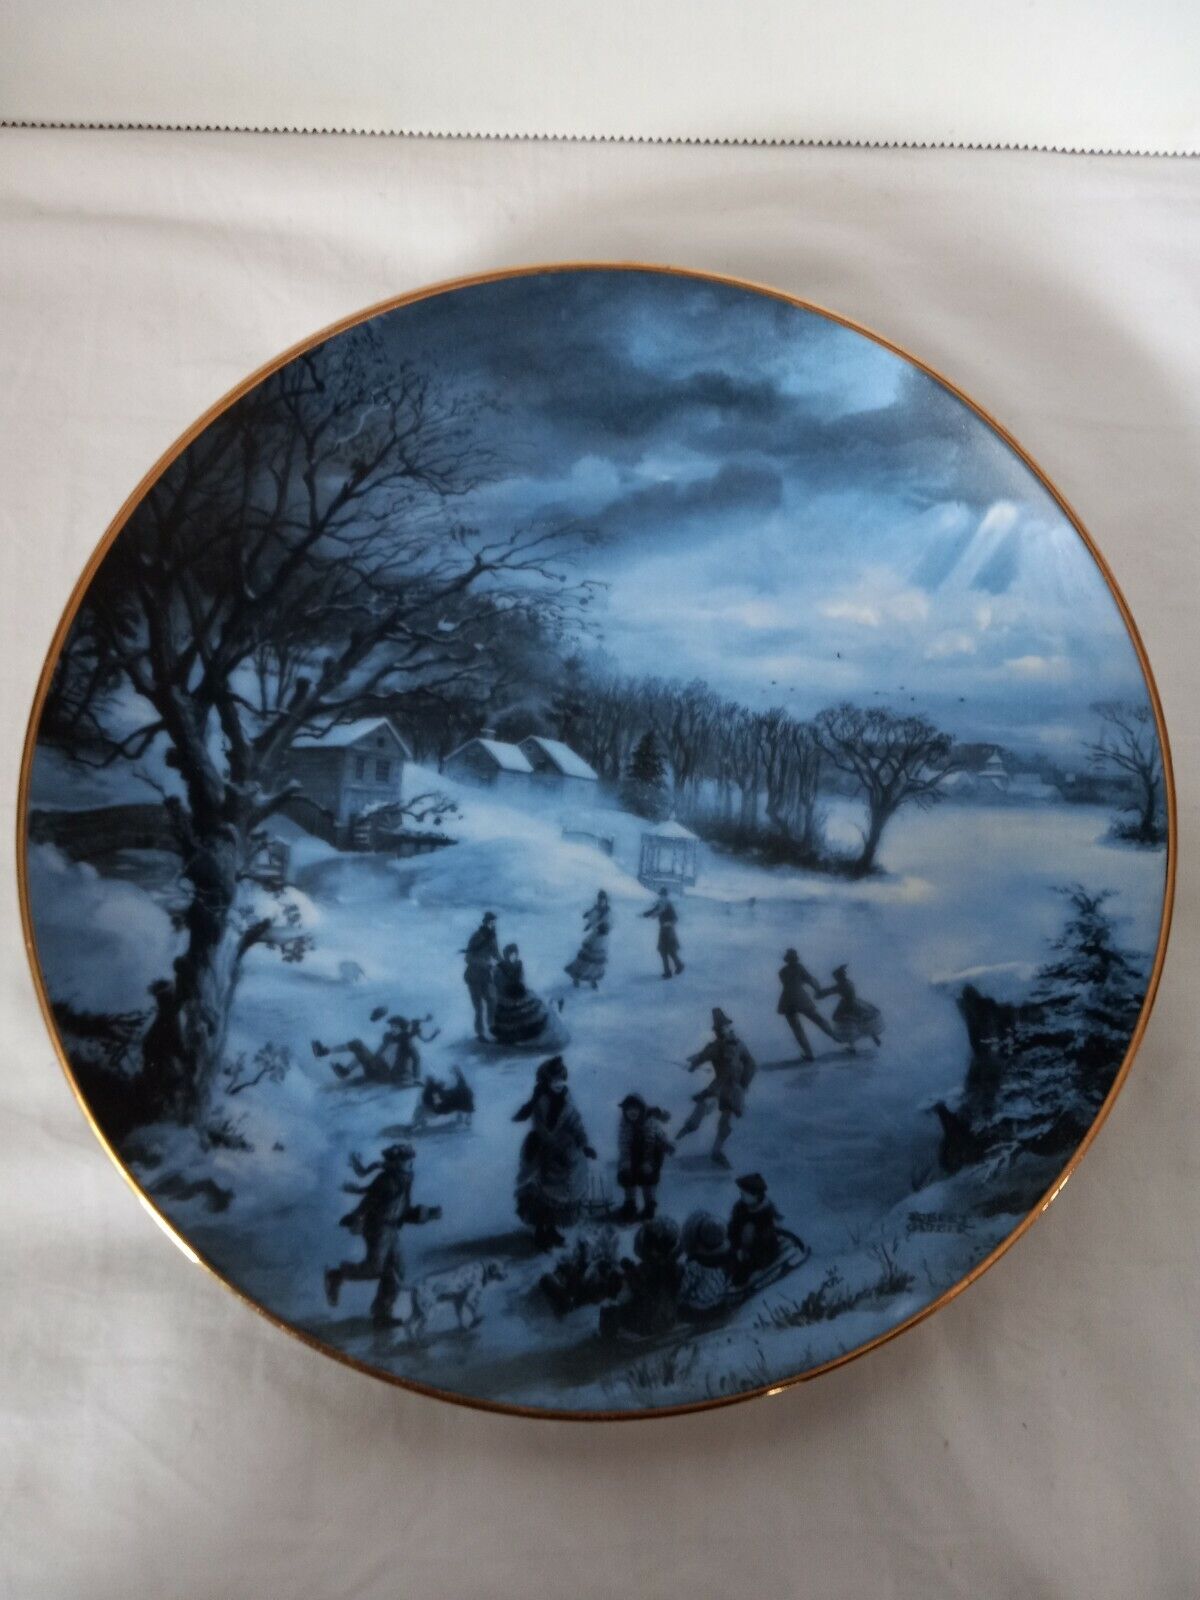 FIRST FREEZE American Blues collector plate 1989 by Rob Sauber, 24K Rim #279A